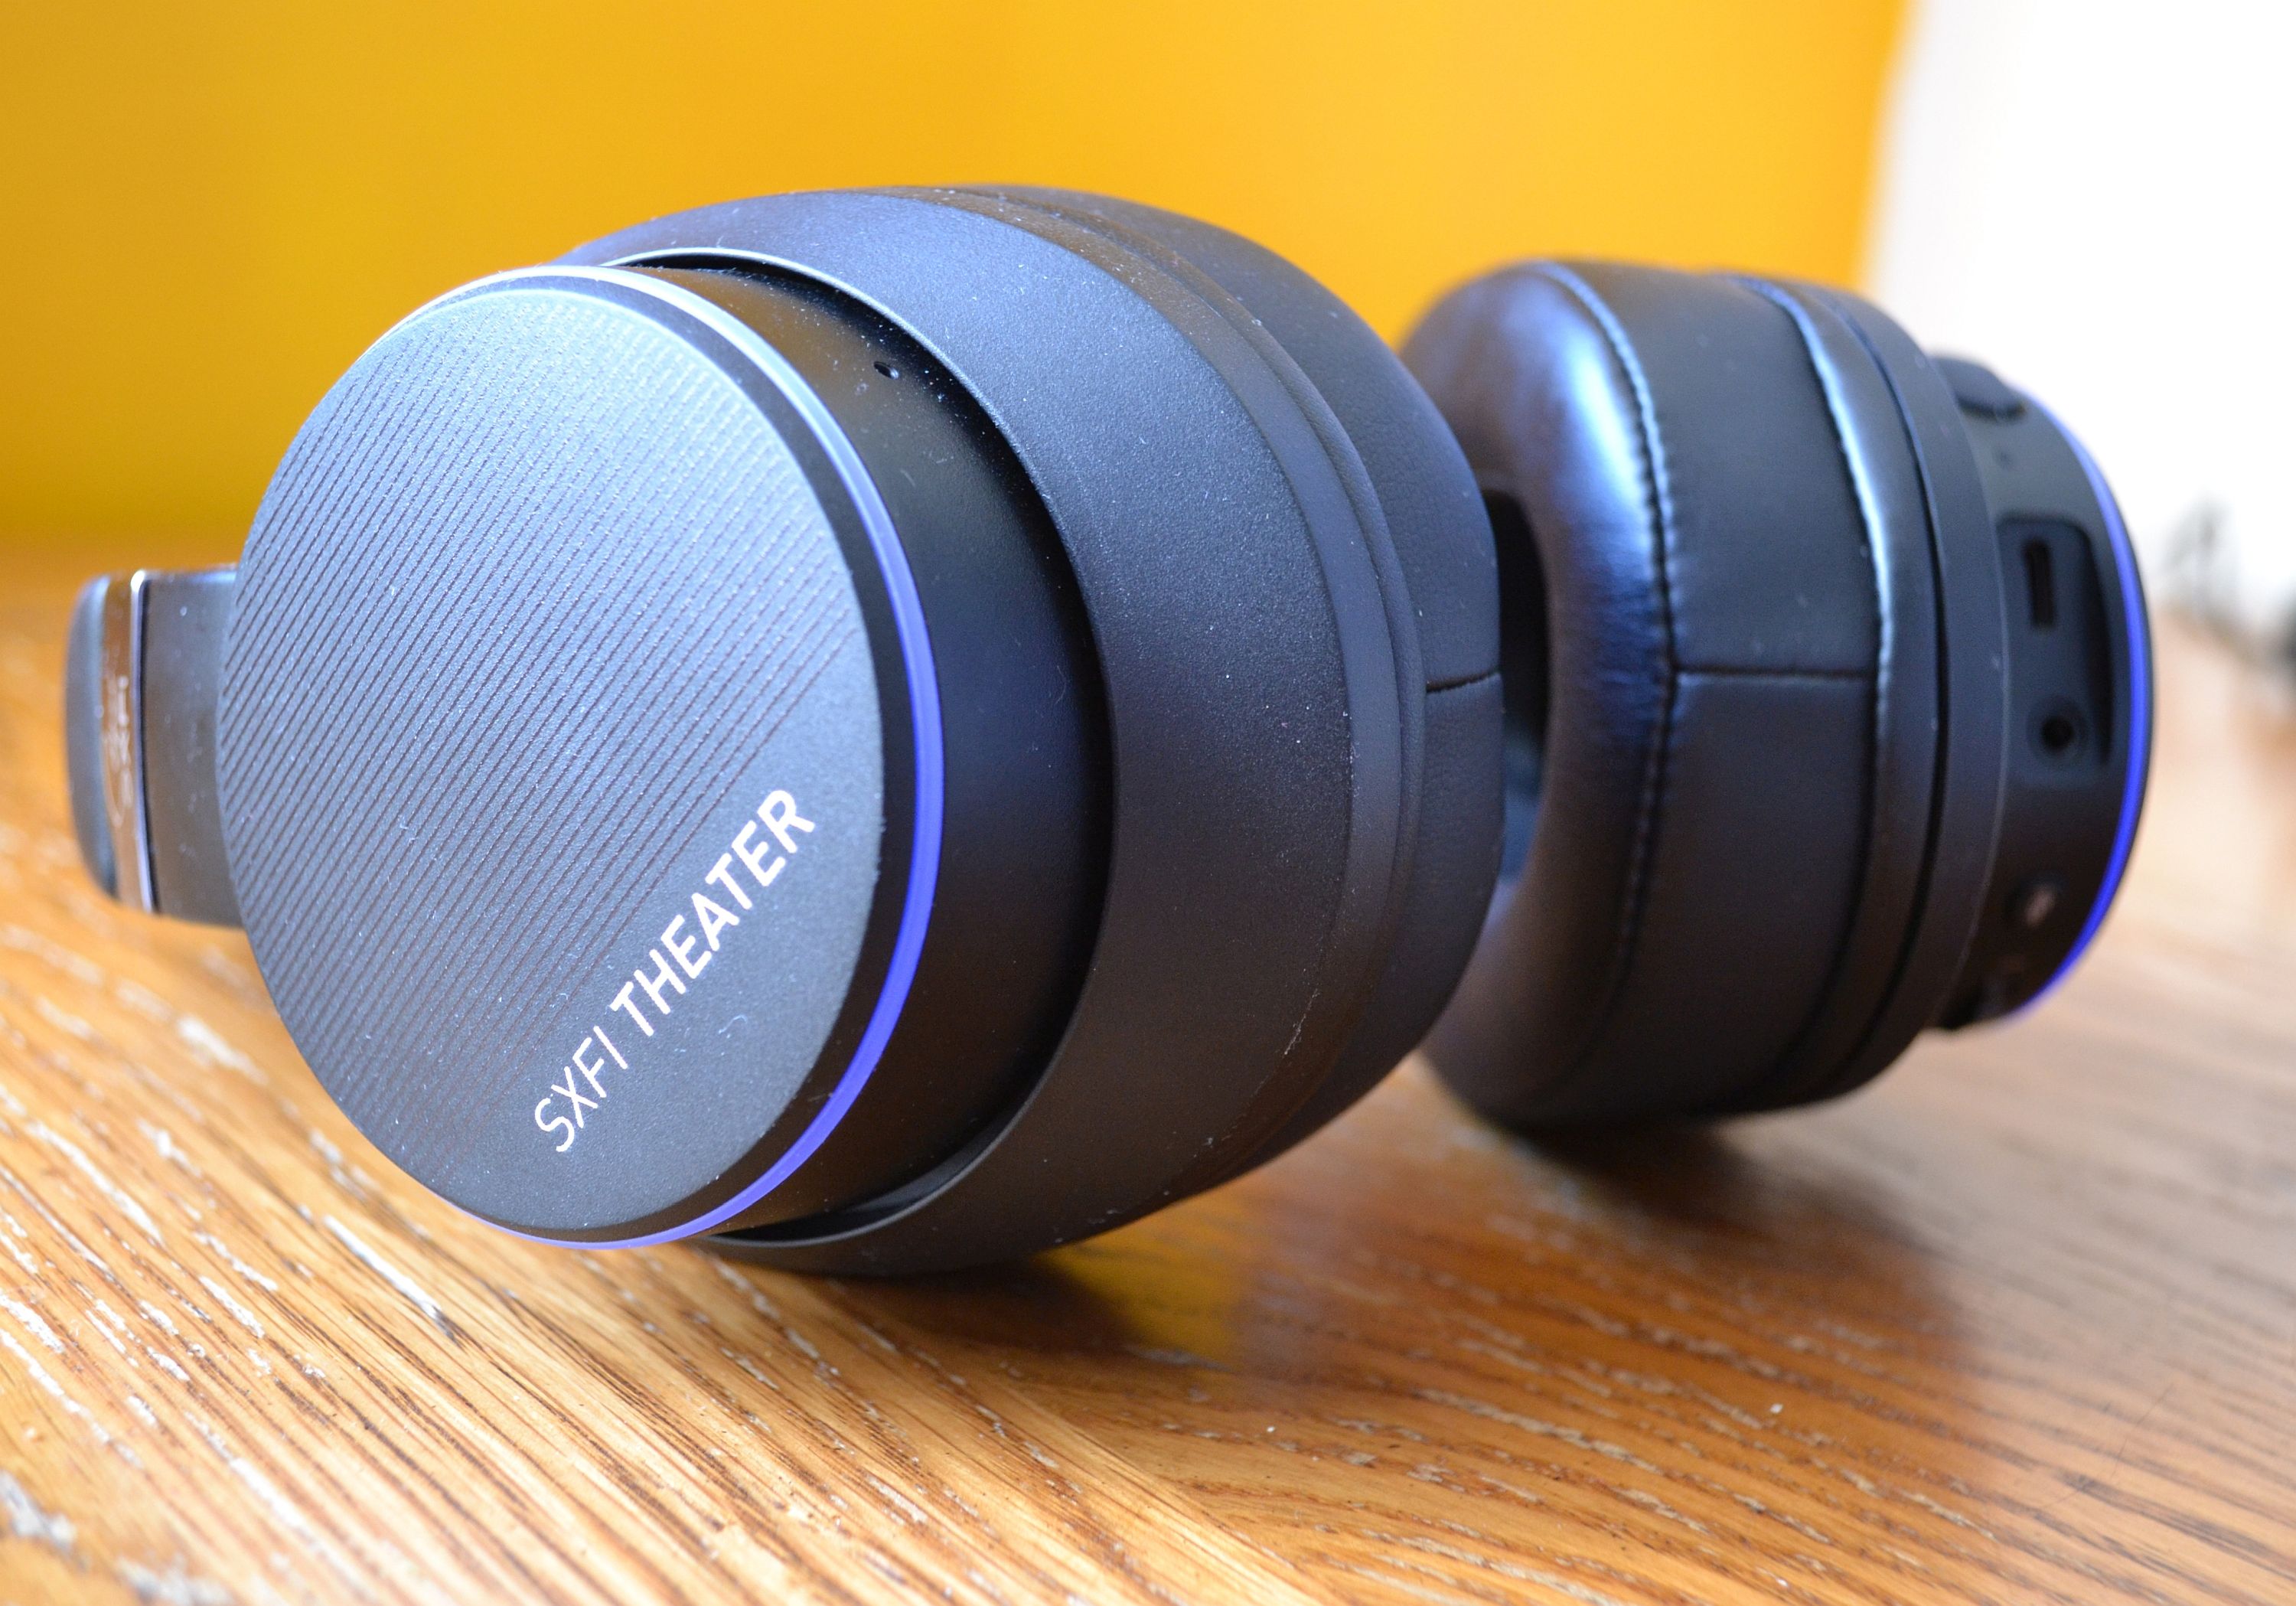 Creative Super X-Fi Theater: Excellent Headphones with Optional